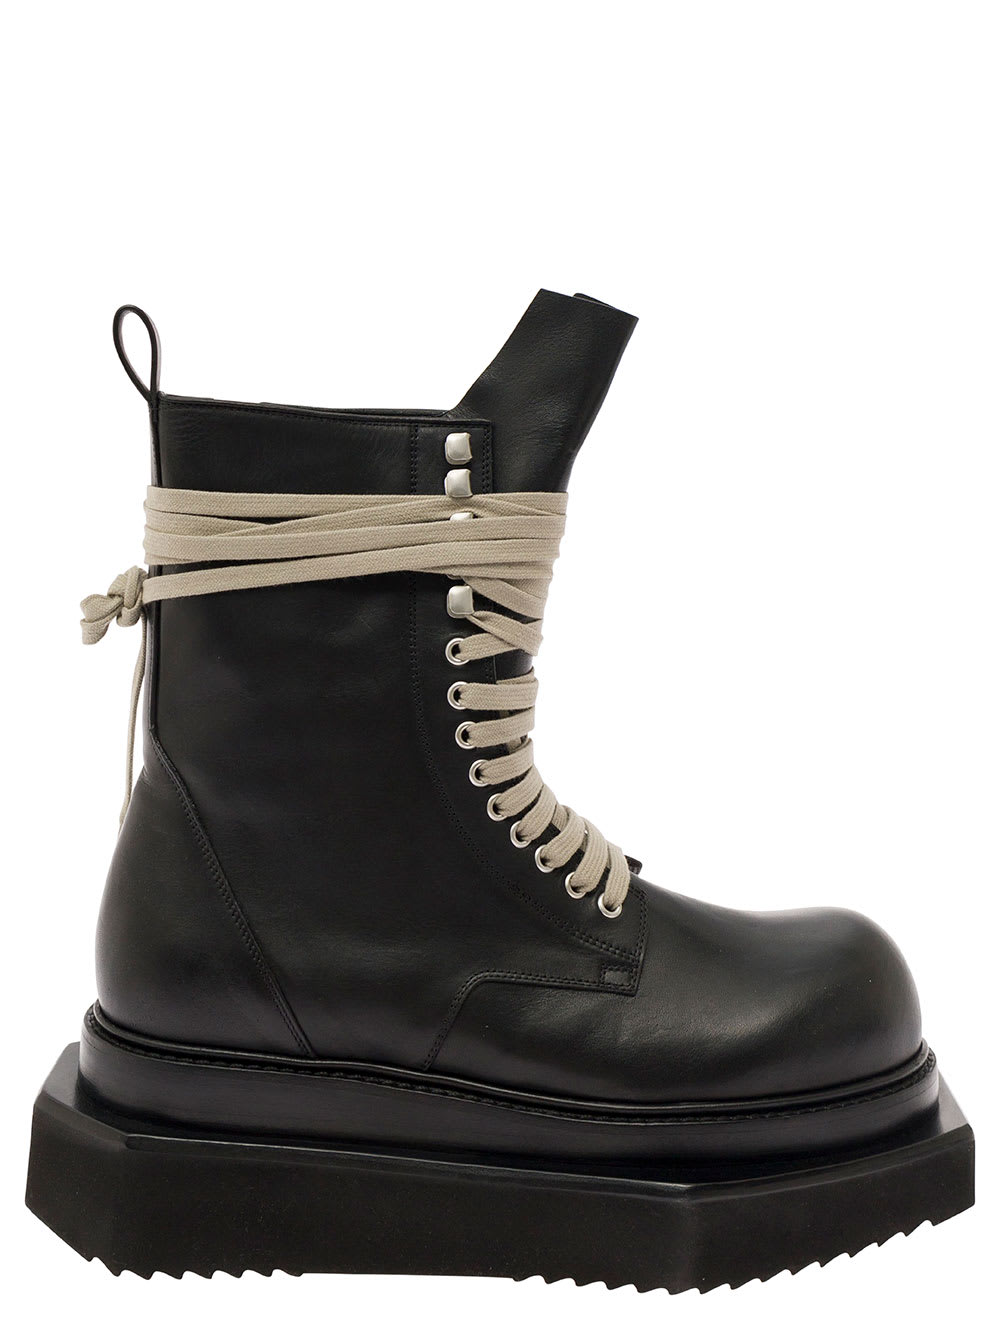 RICK OWENS TURBO CYCLOPS BLACK LACE-UP BOOTS WITH OVERSIZED PLATFORM IN LEATHER MAN